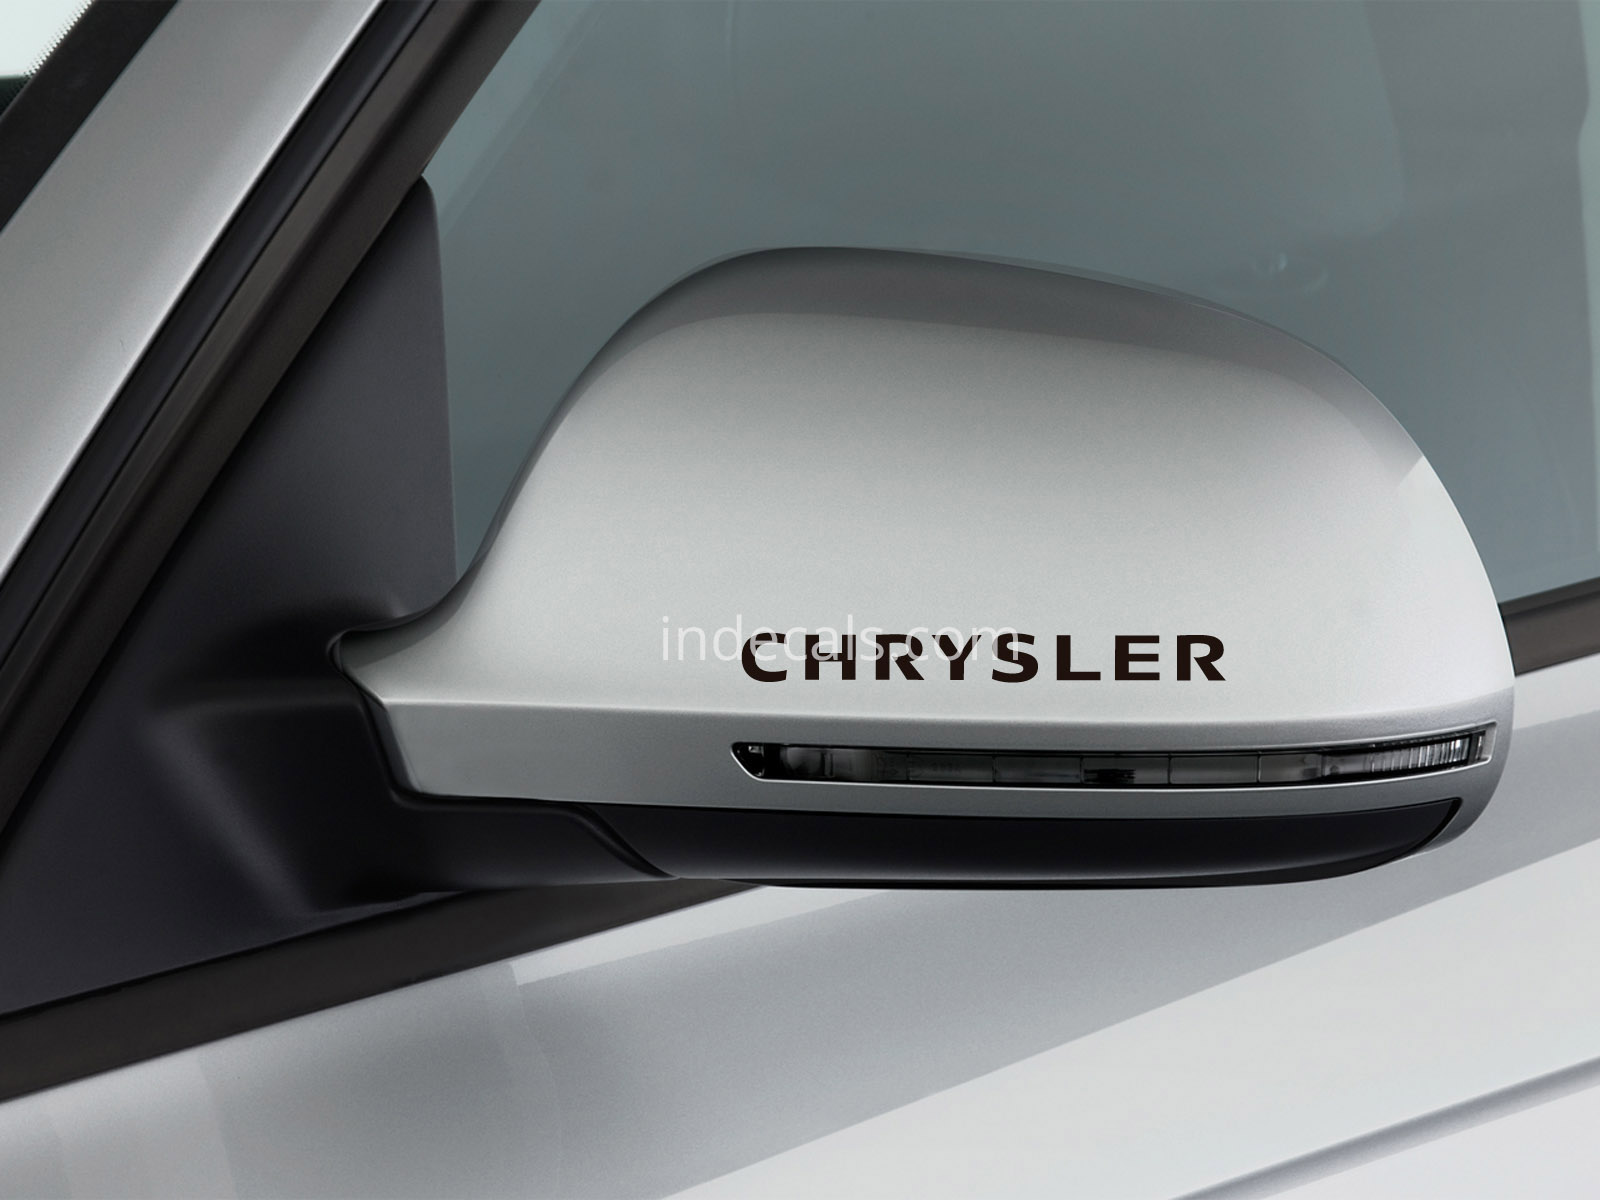 3 x Chrysler Stickers for Mirrors - Black